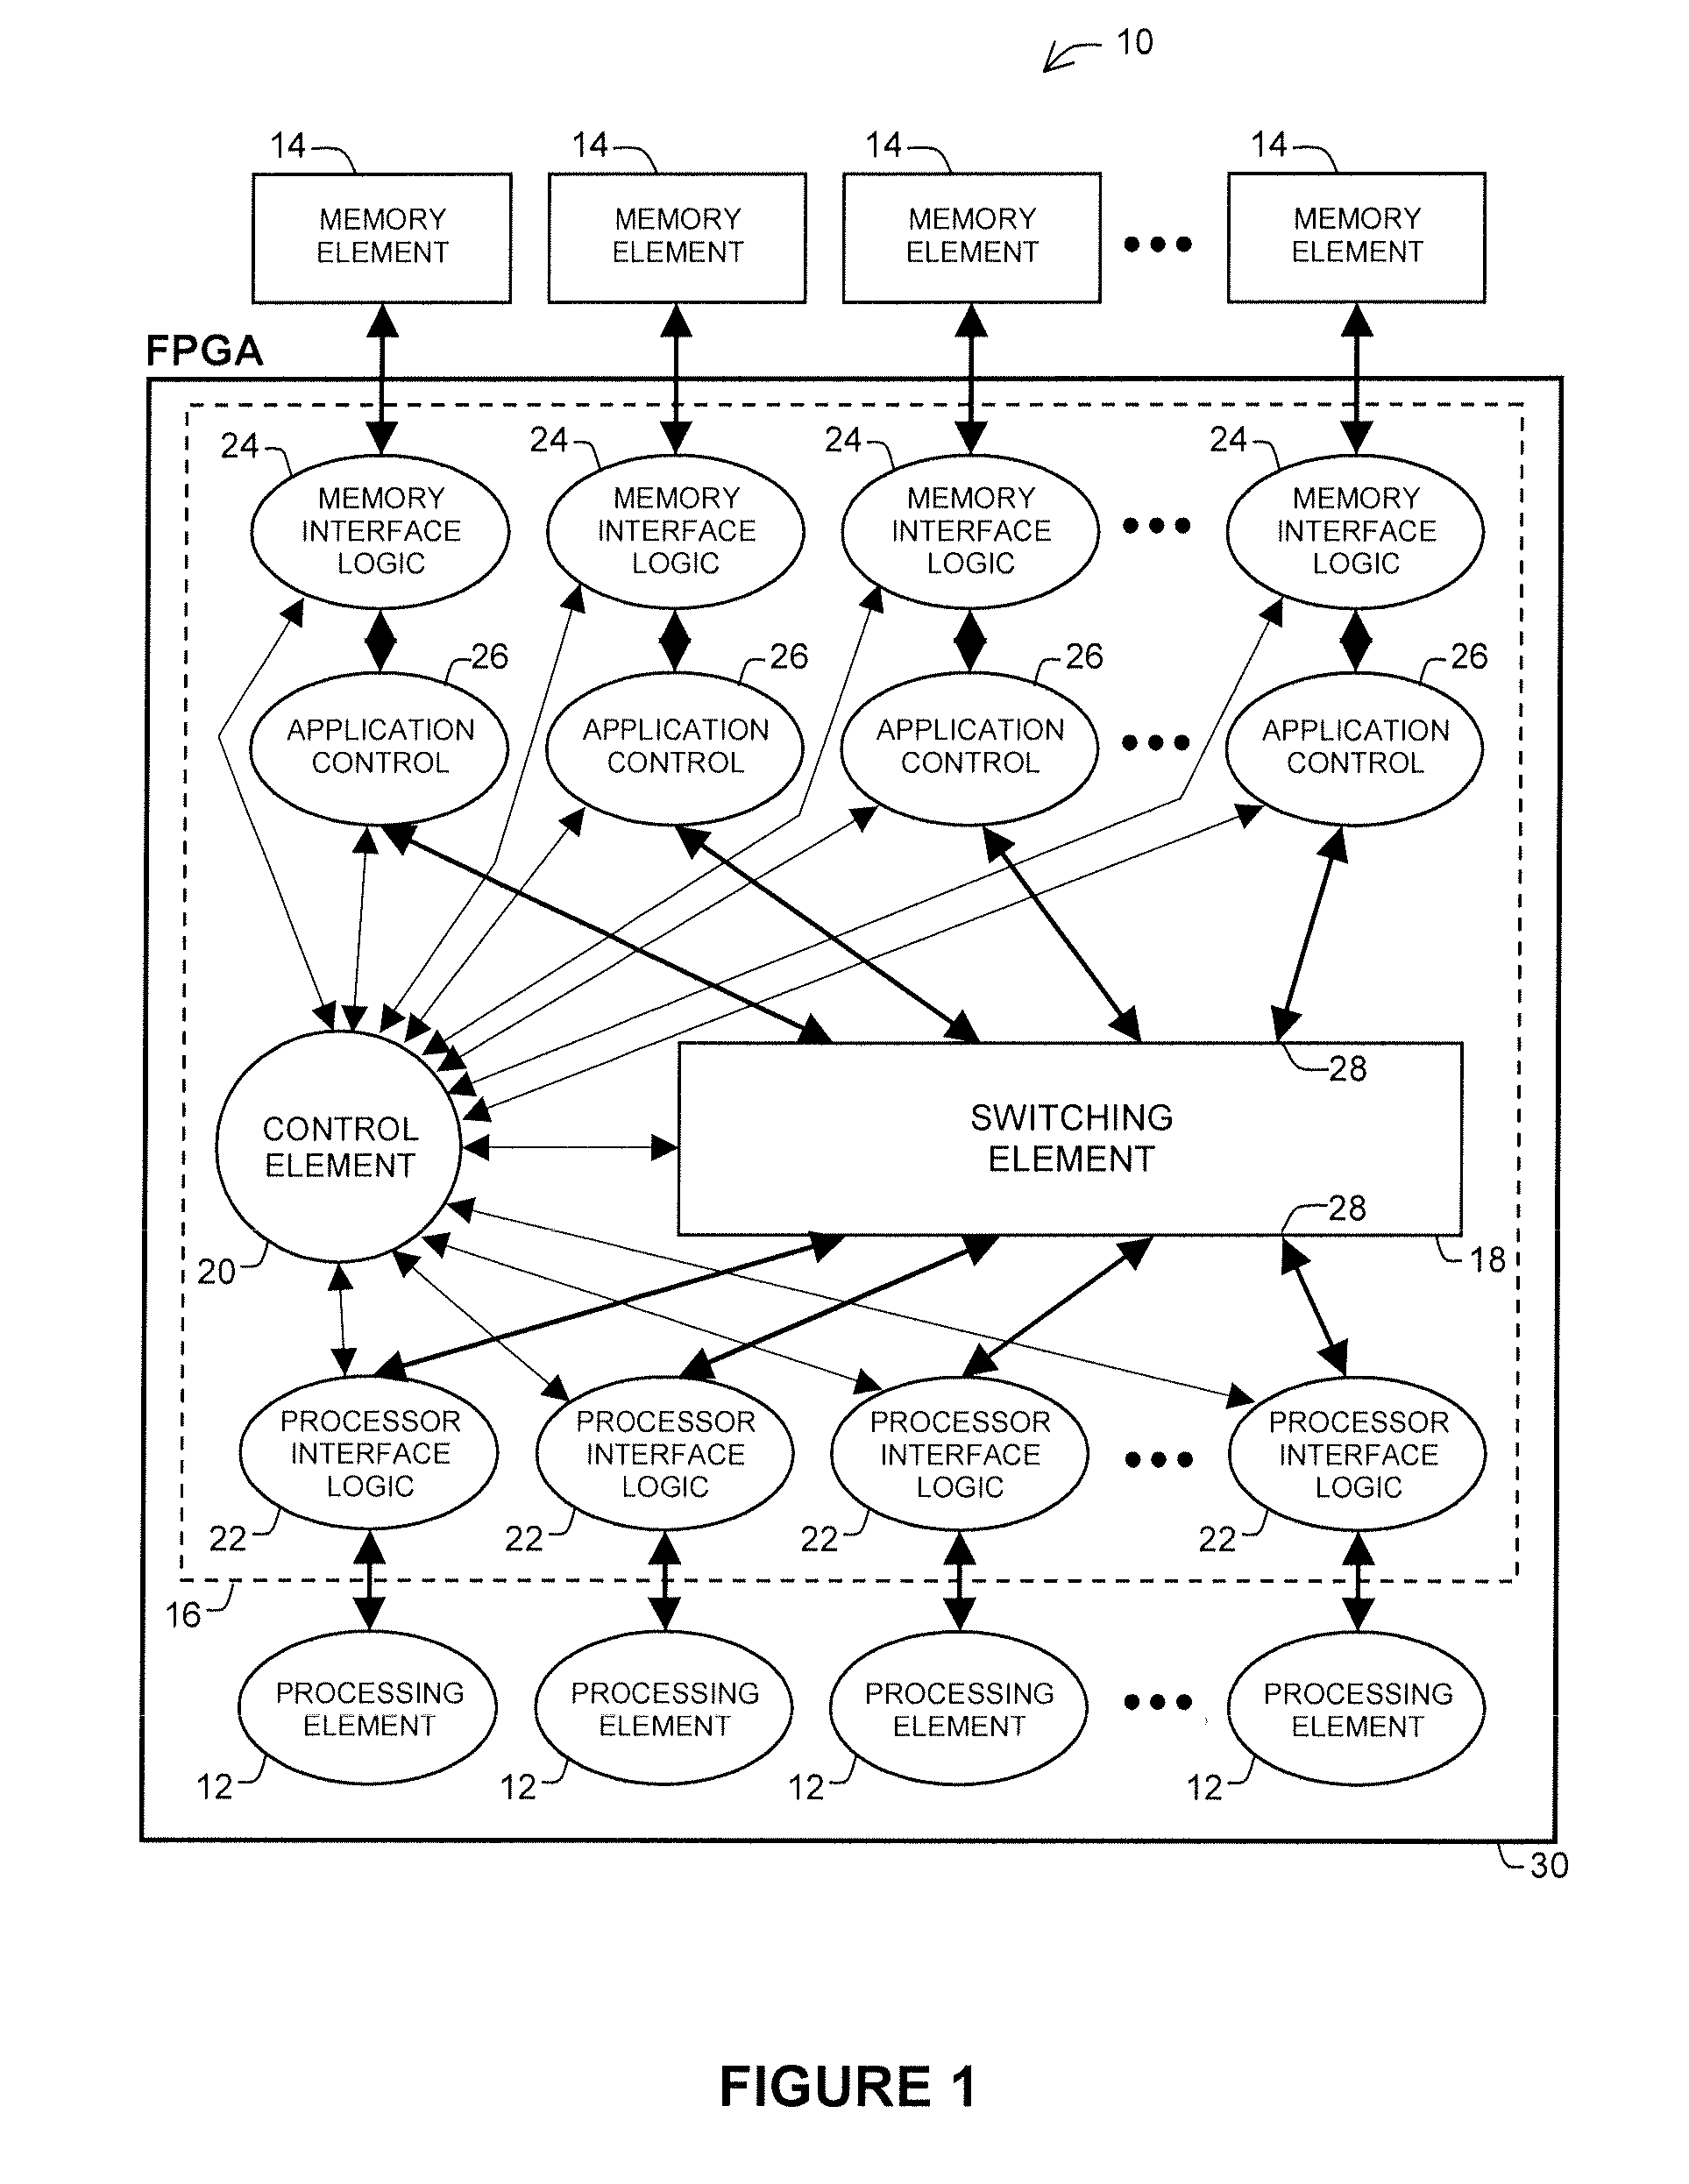 Switch-based parallel distributed cache architecture for memory access on reconfigurable computing platforms